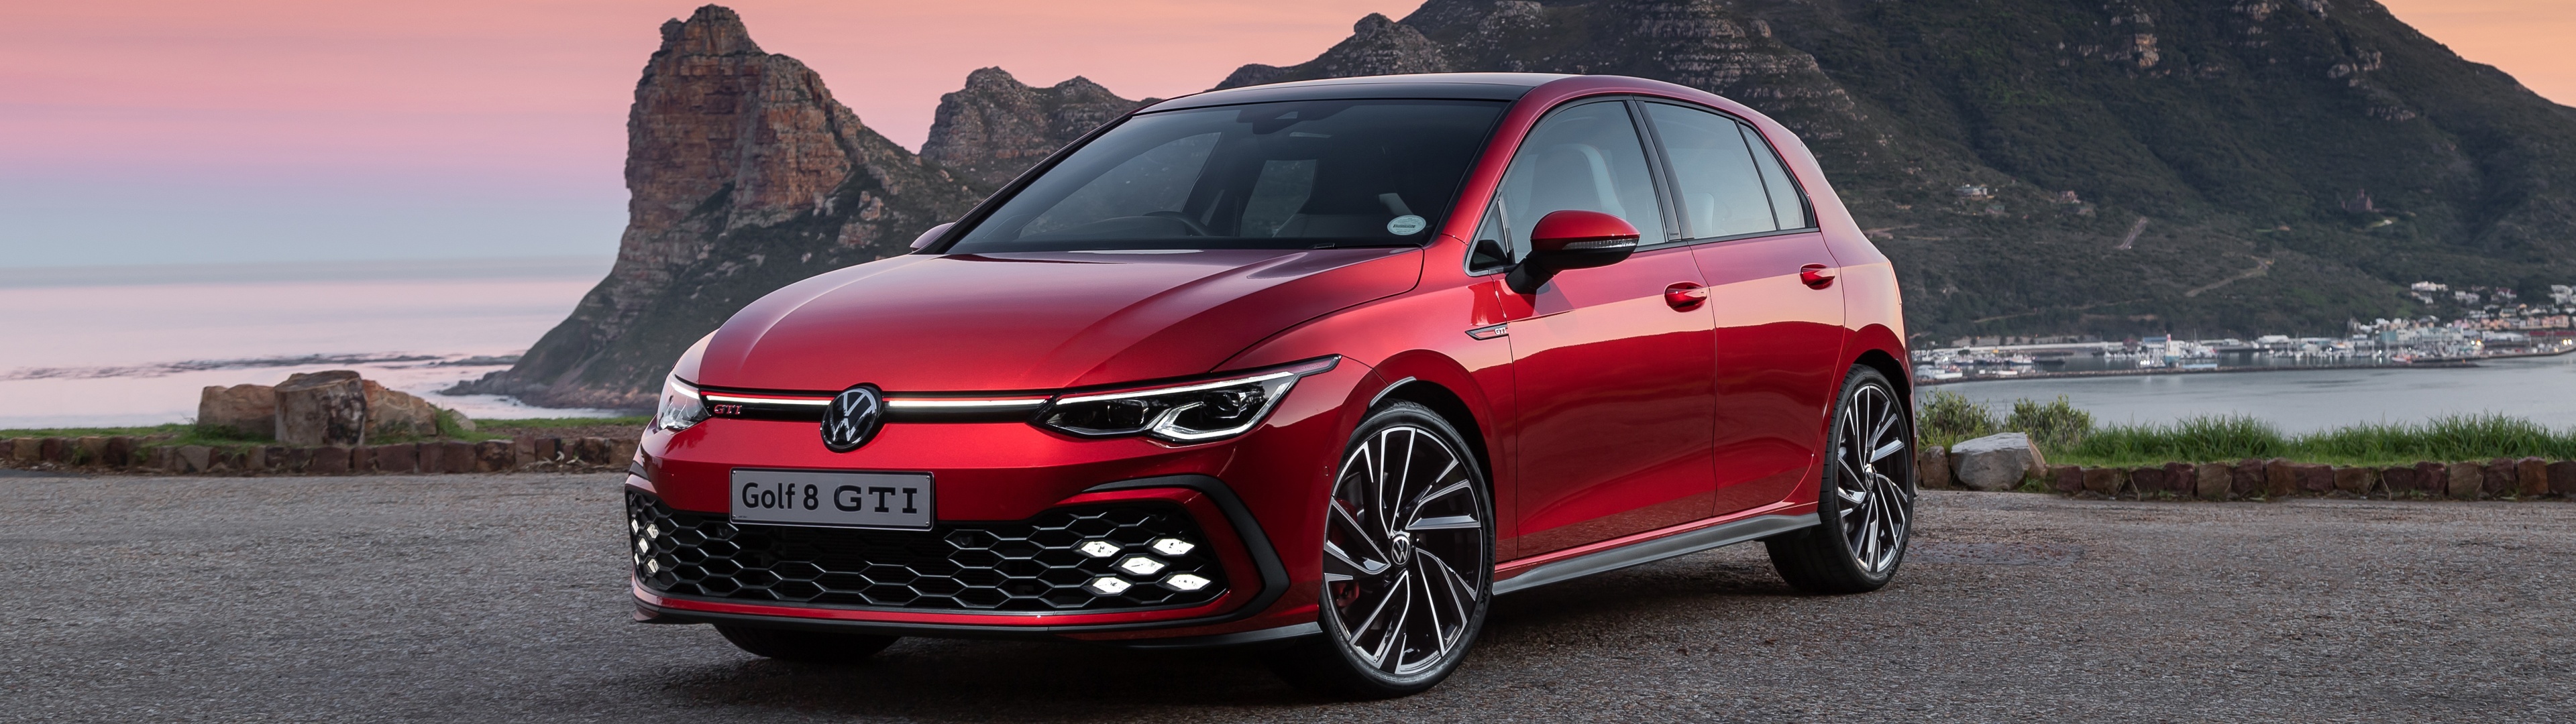 GTI power unleashed, 2021 model, High-performance hatchback, Thrilling driving experience, 3840x1080 Dual Screen Desktop